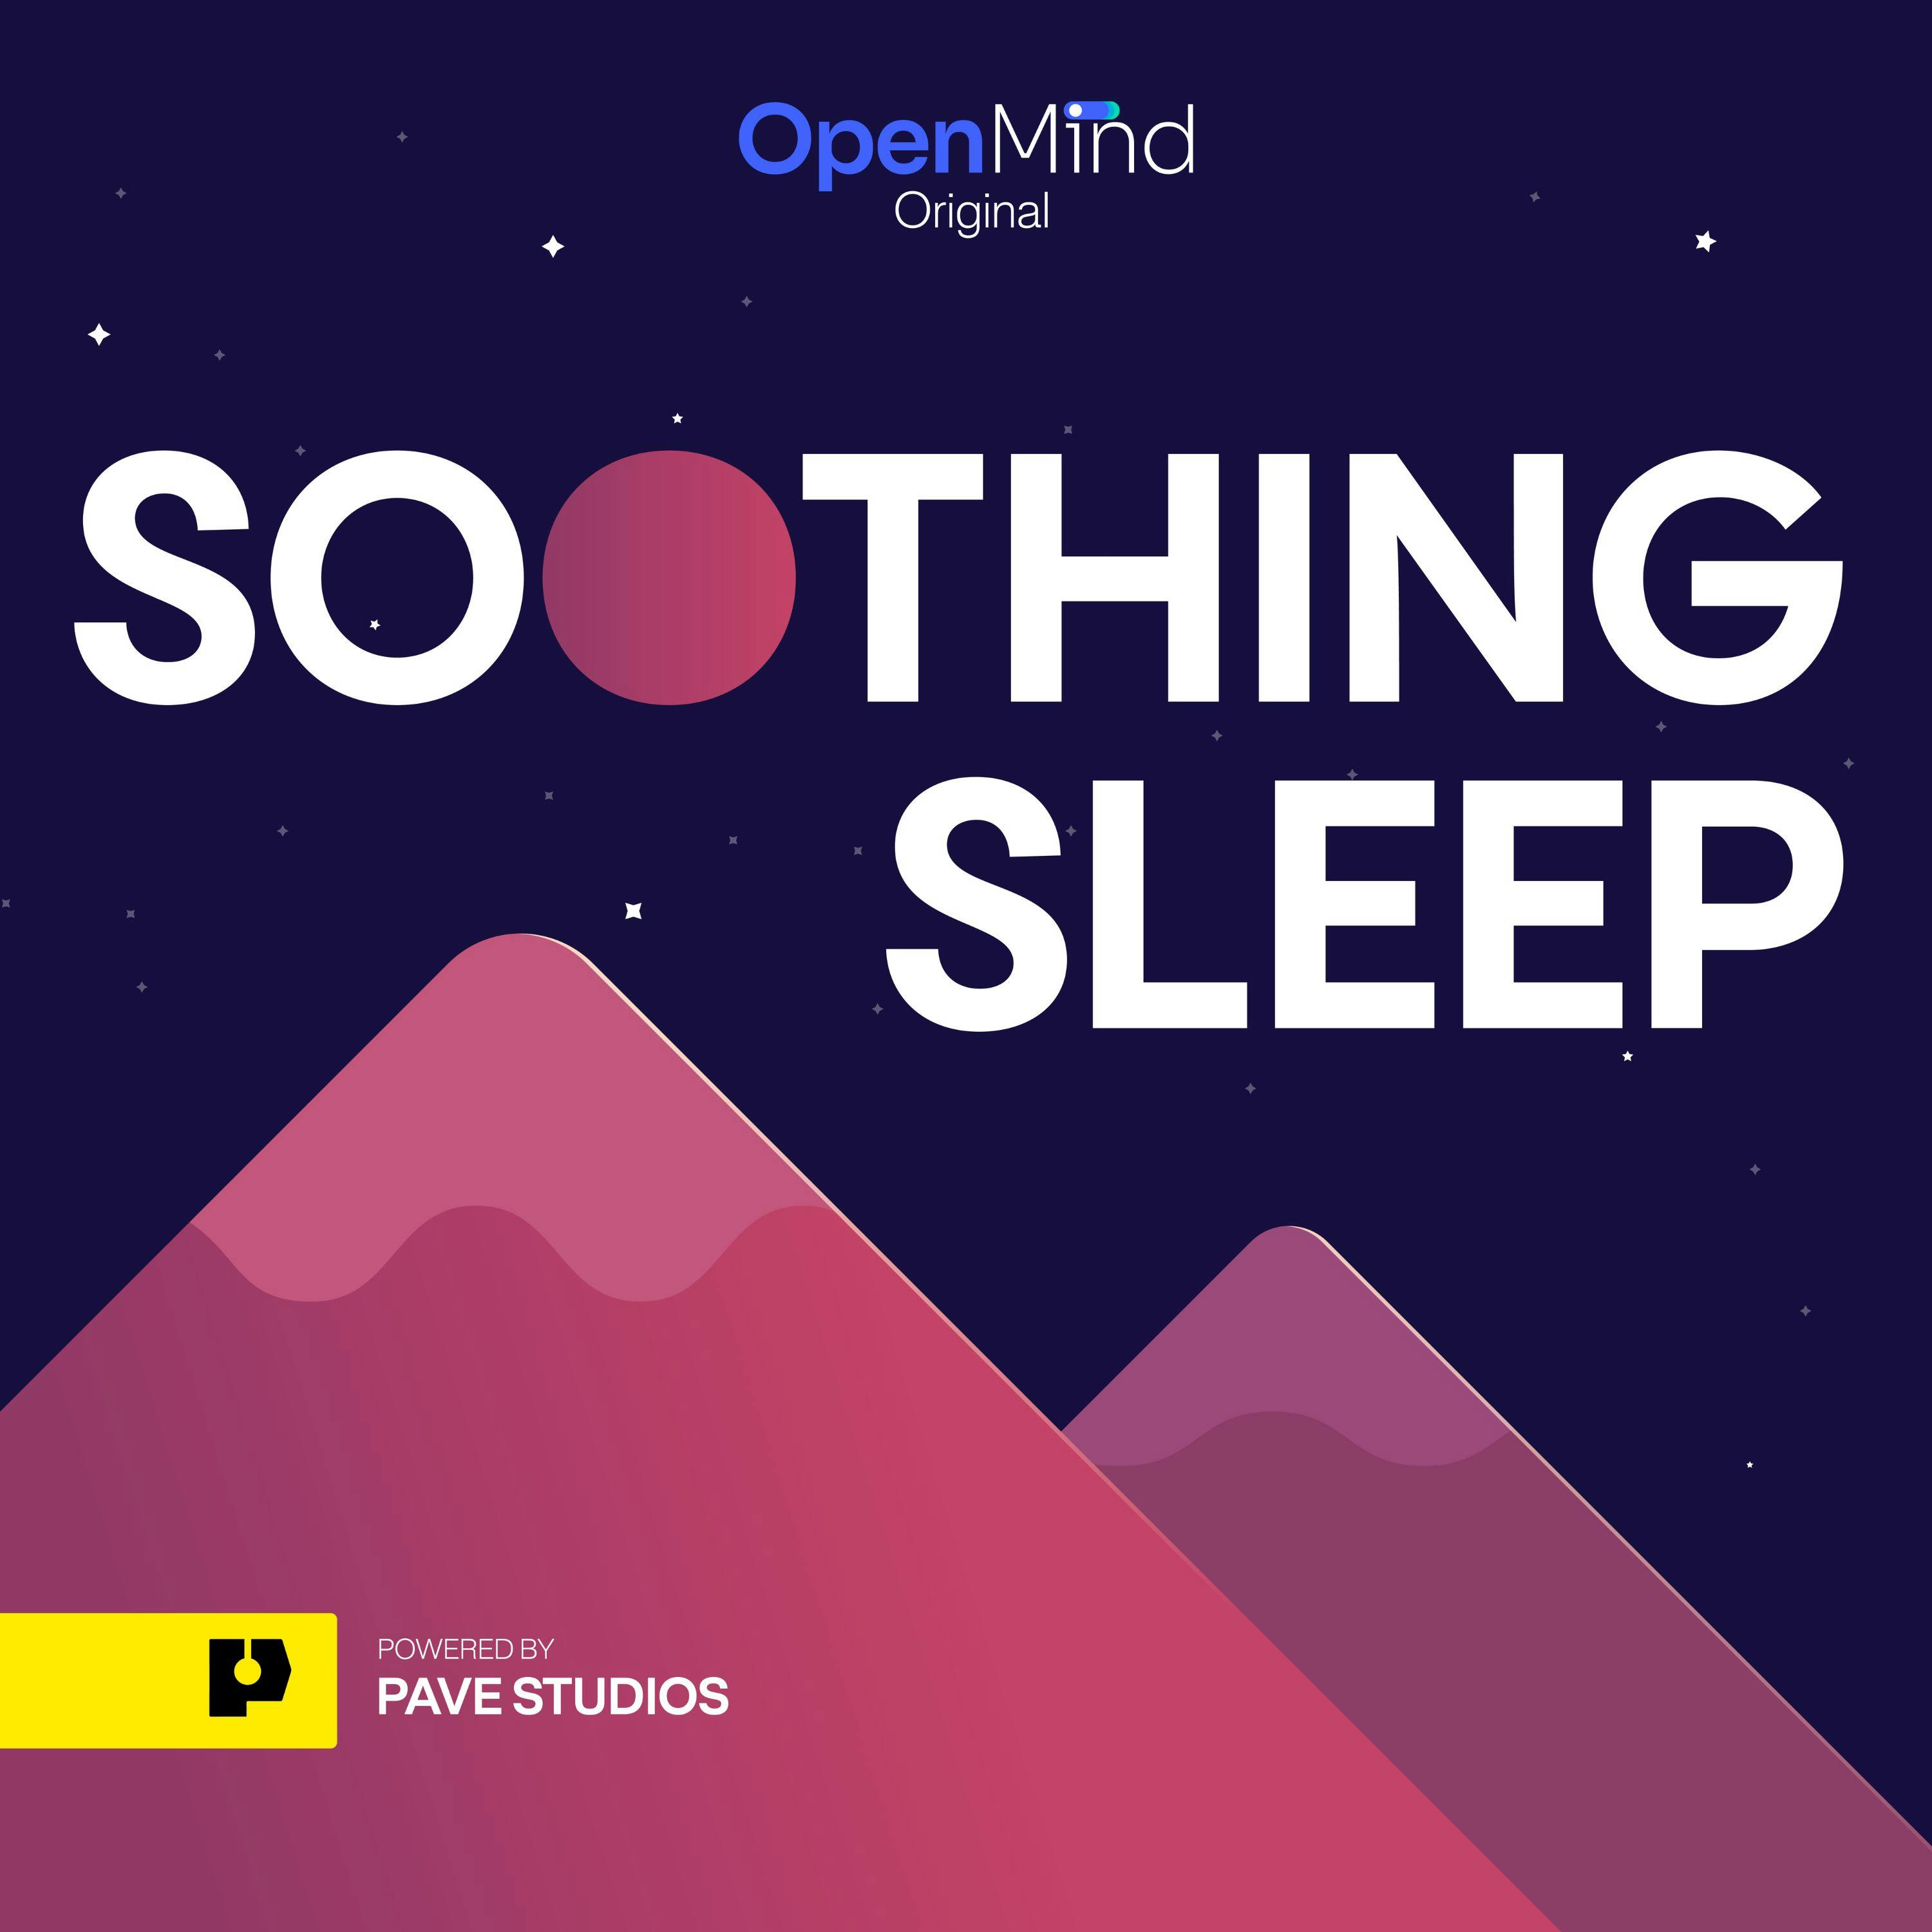 Soothing Sleep by OpenMind 